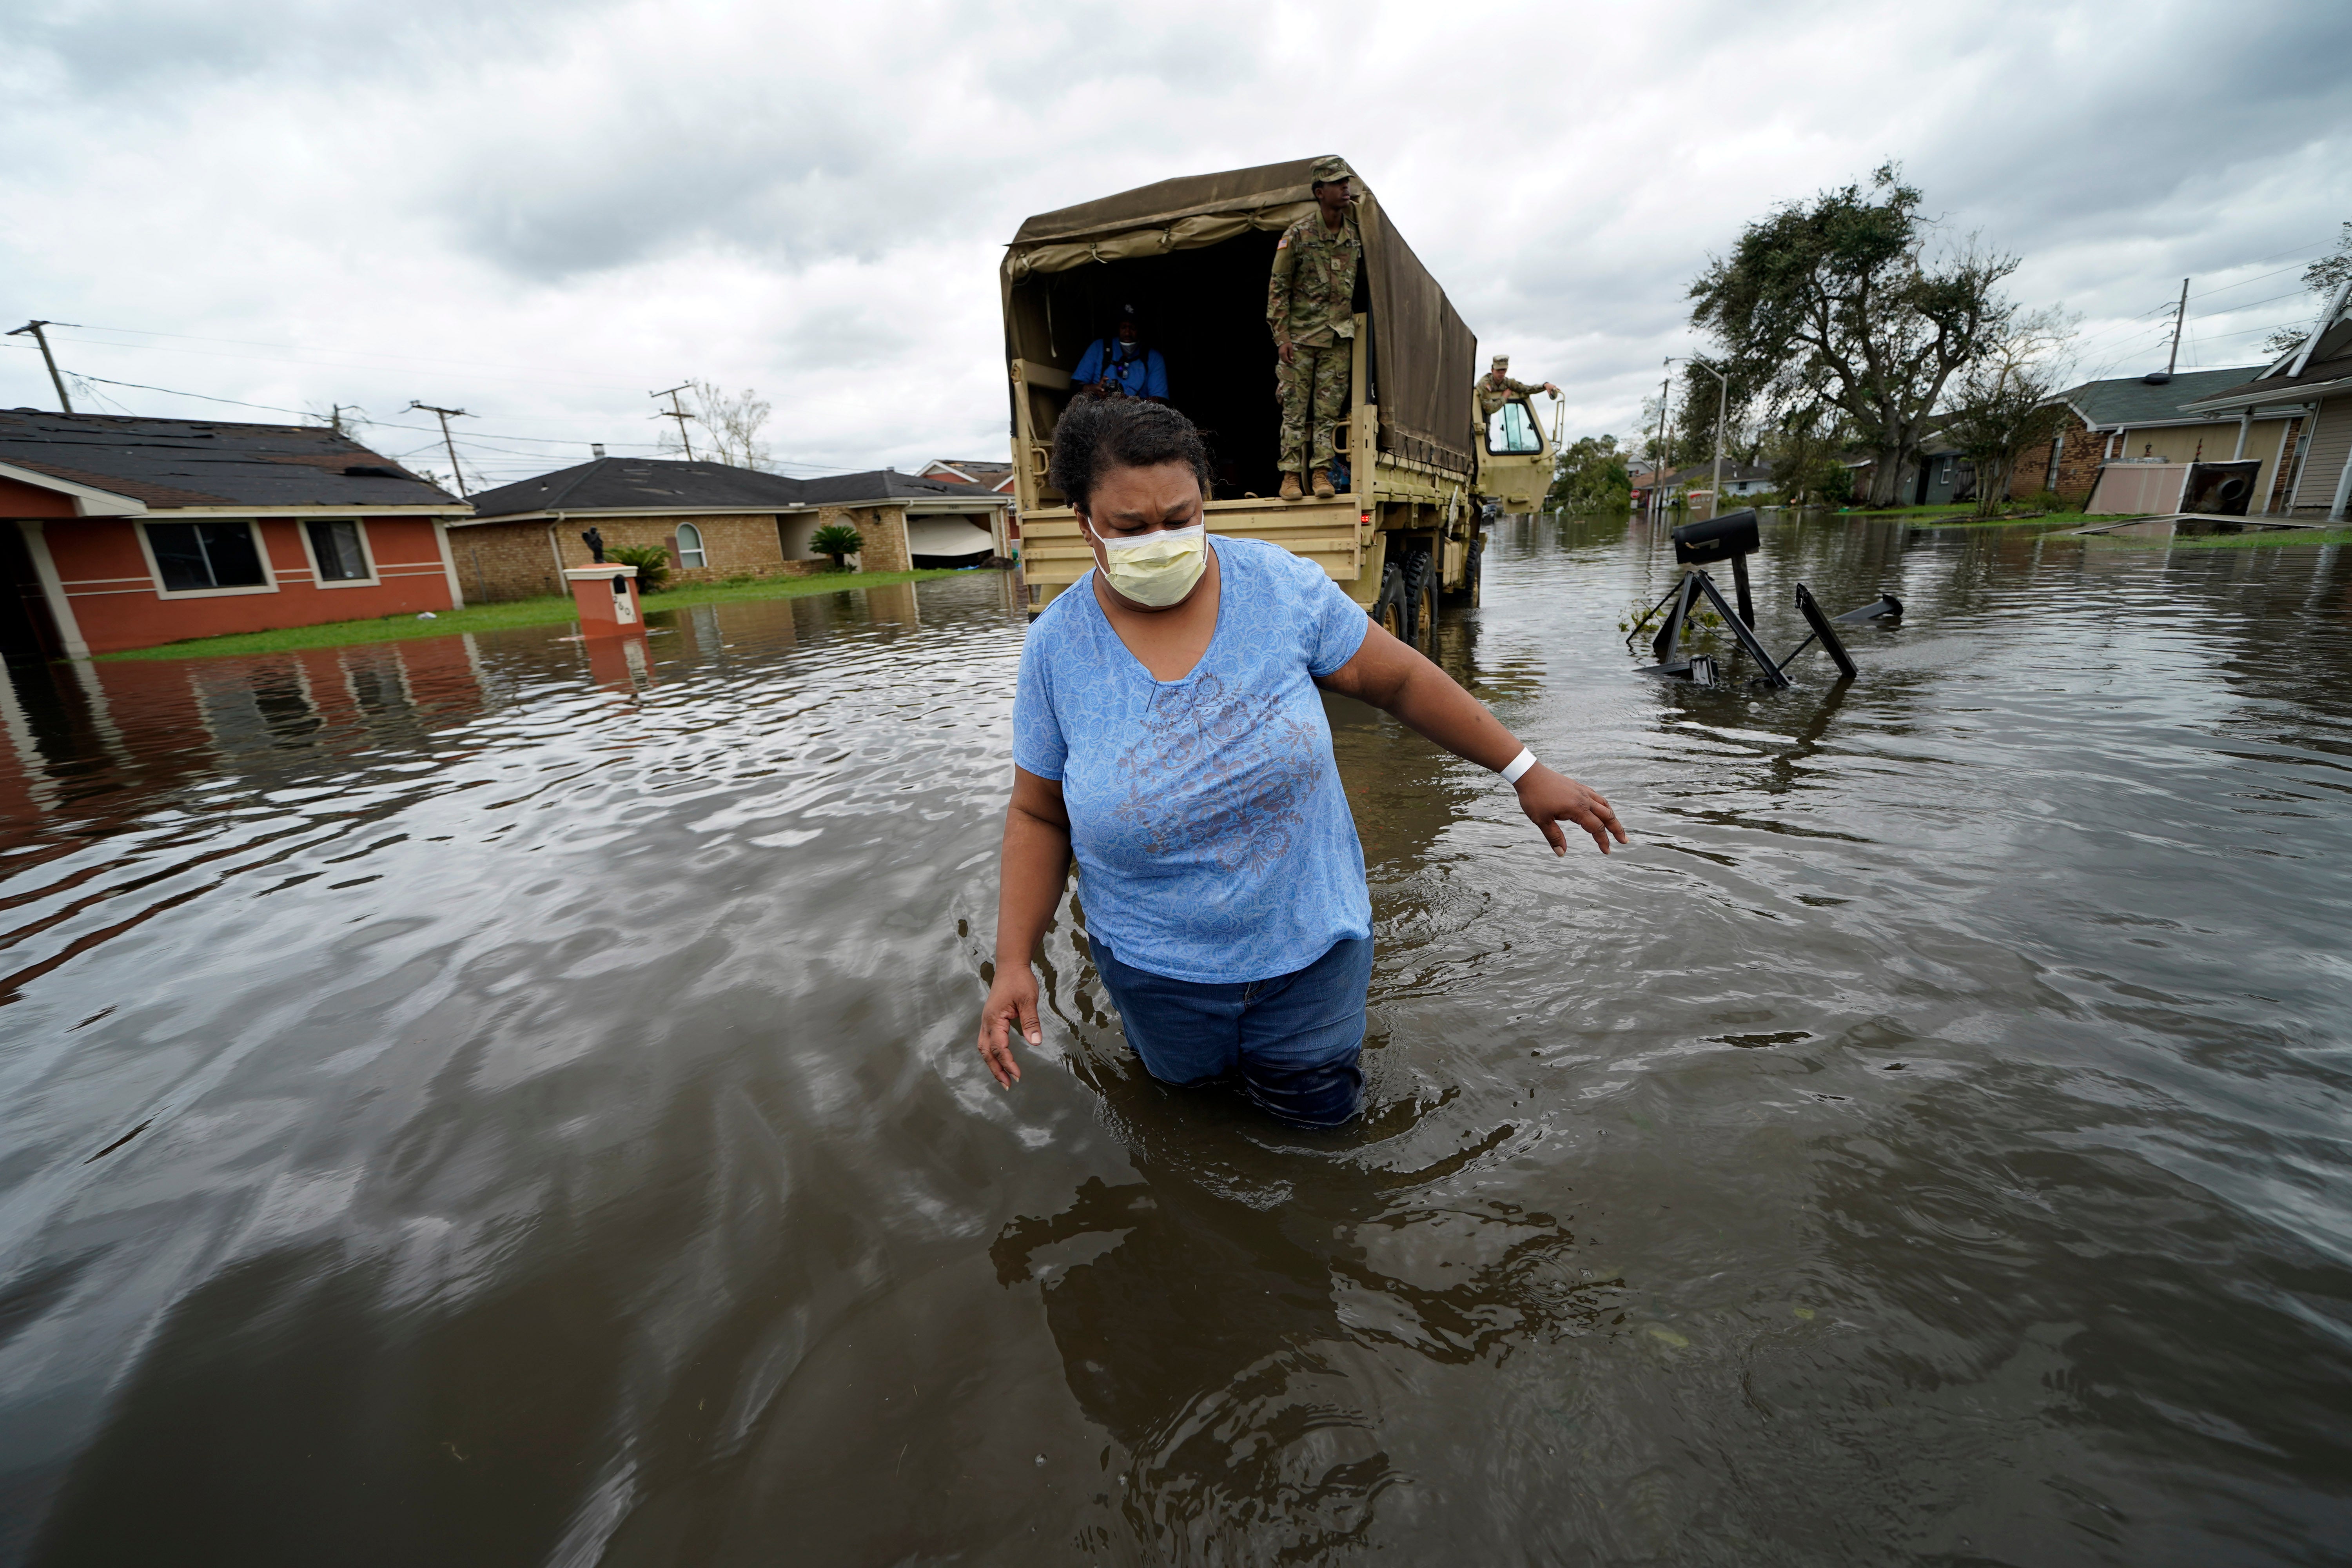 Jerilyn Collins wades through floodwaters after being transported by the Louisiana National Guard back to her home to retrieve medicine for herself and her father, after she evacuated from rising water in the aftermath of Hurricane Ida in LaPlace, Louisiana